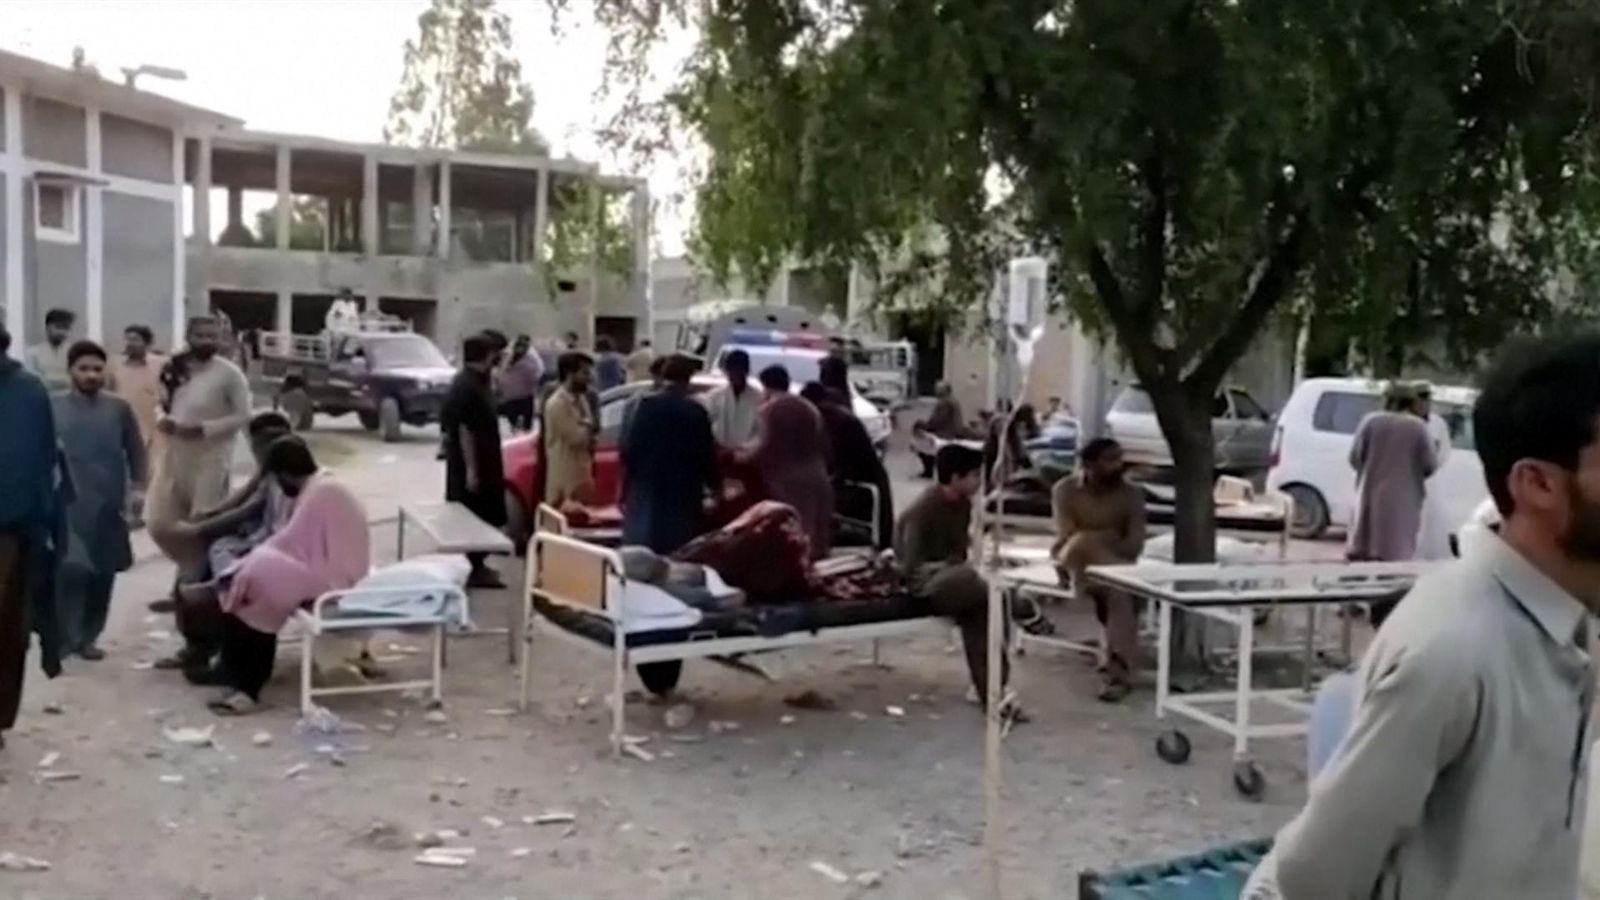 At least 20 people have died and hundreds have been injured in the earthquake in Pakistan